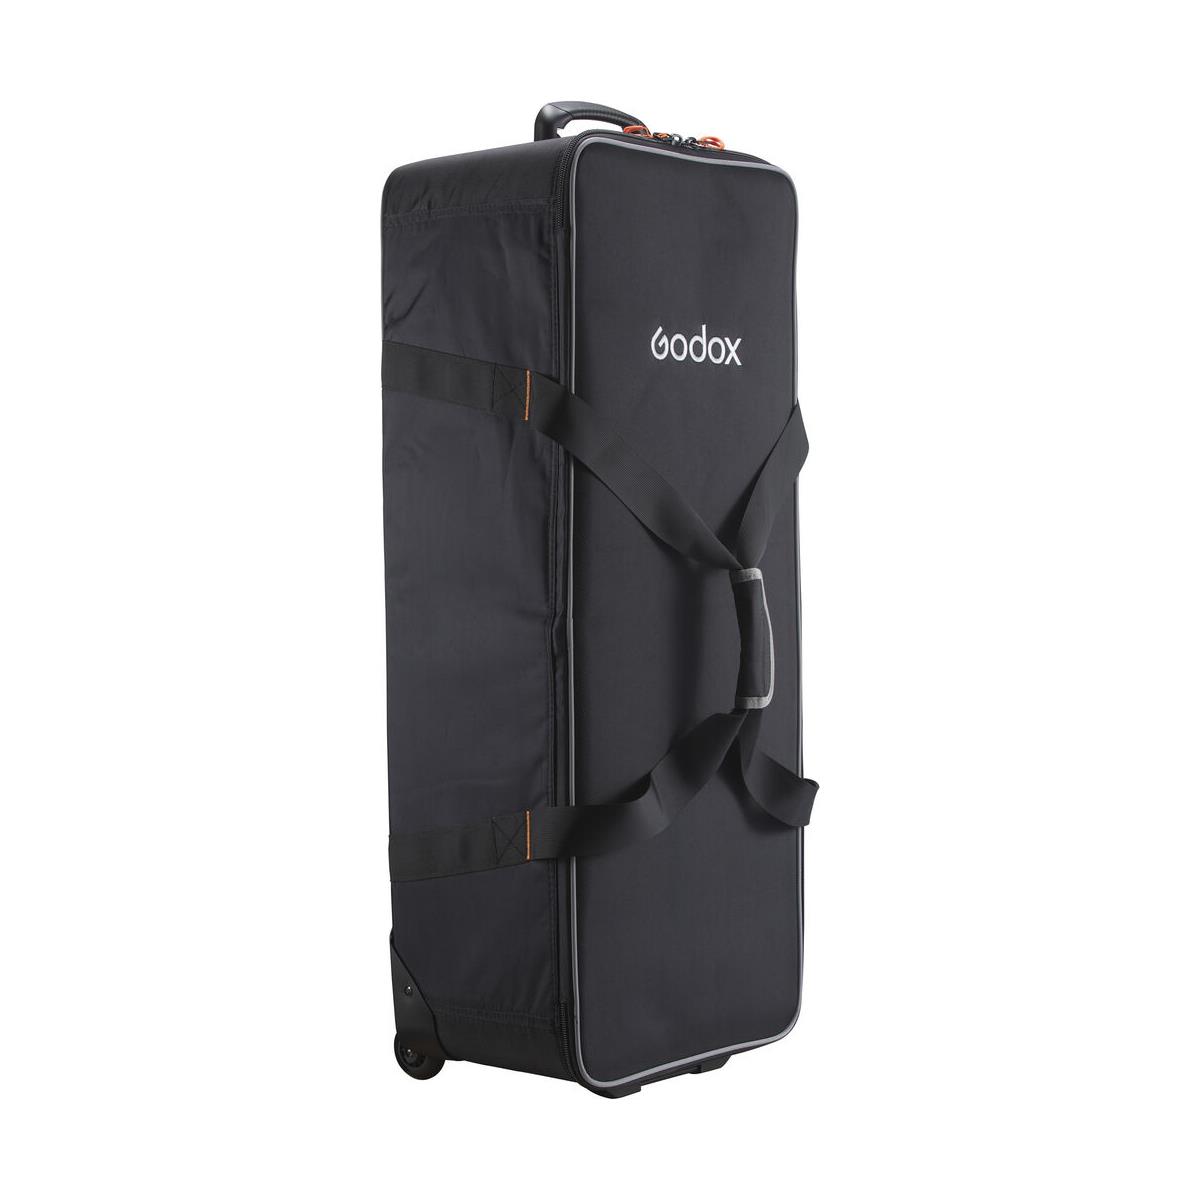 Photos - Other for studios Godox CB-06 Hard Carrying Case with Wheels CB06 